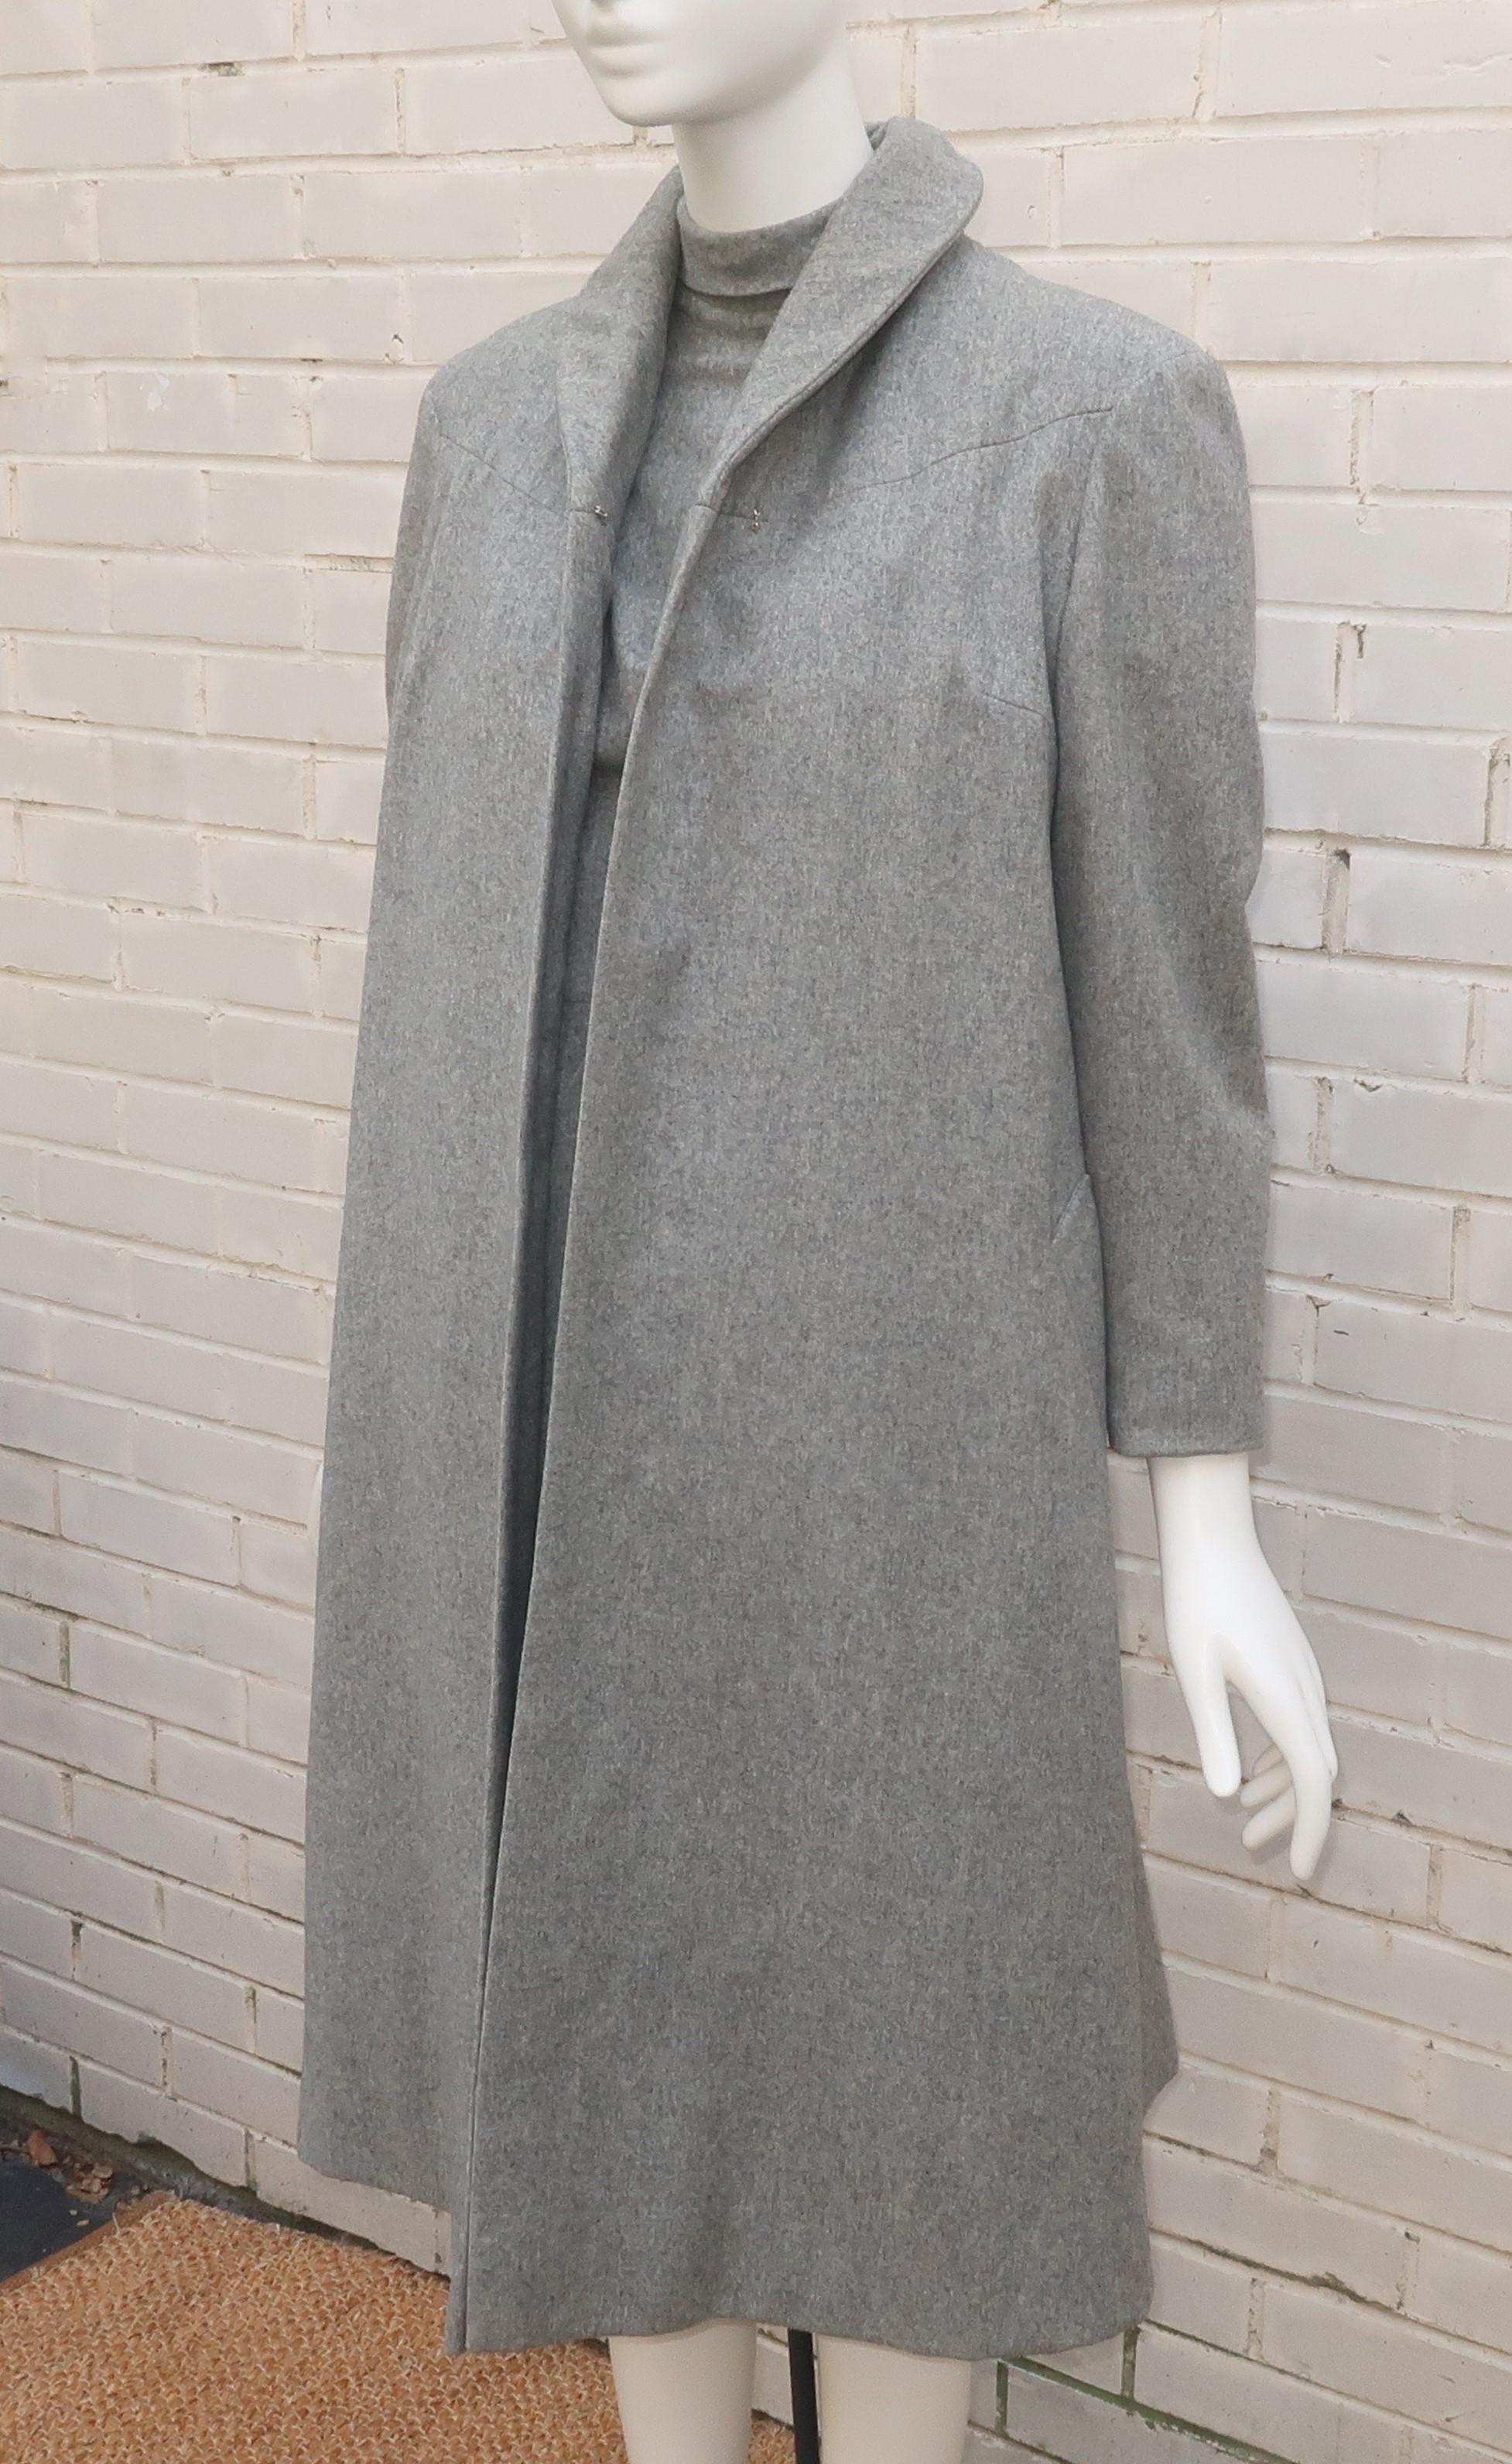 Early 1950's Lillie Rubin dress & coat ensemble in a dove gray flat wool.  The dress has a classic '50's 'wiggle' silhouette with a rolled mock turtle neck collar and a bustle style panel in the back accented by a black grosgrain ribbon bow.  It